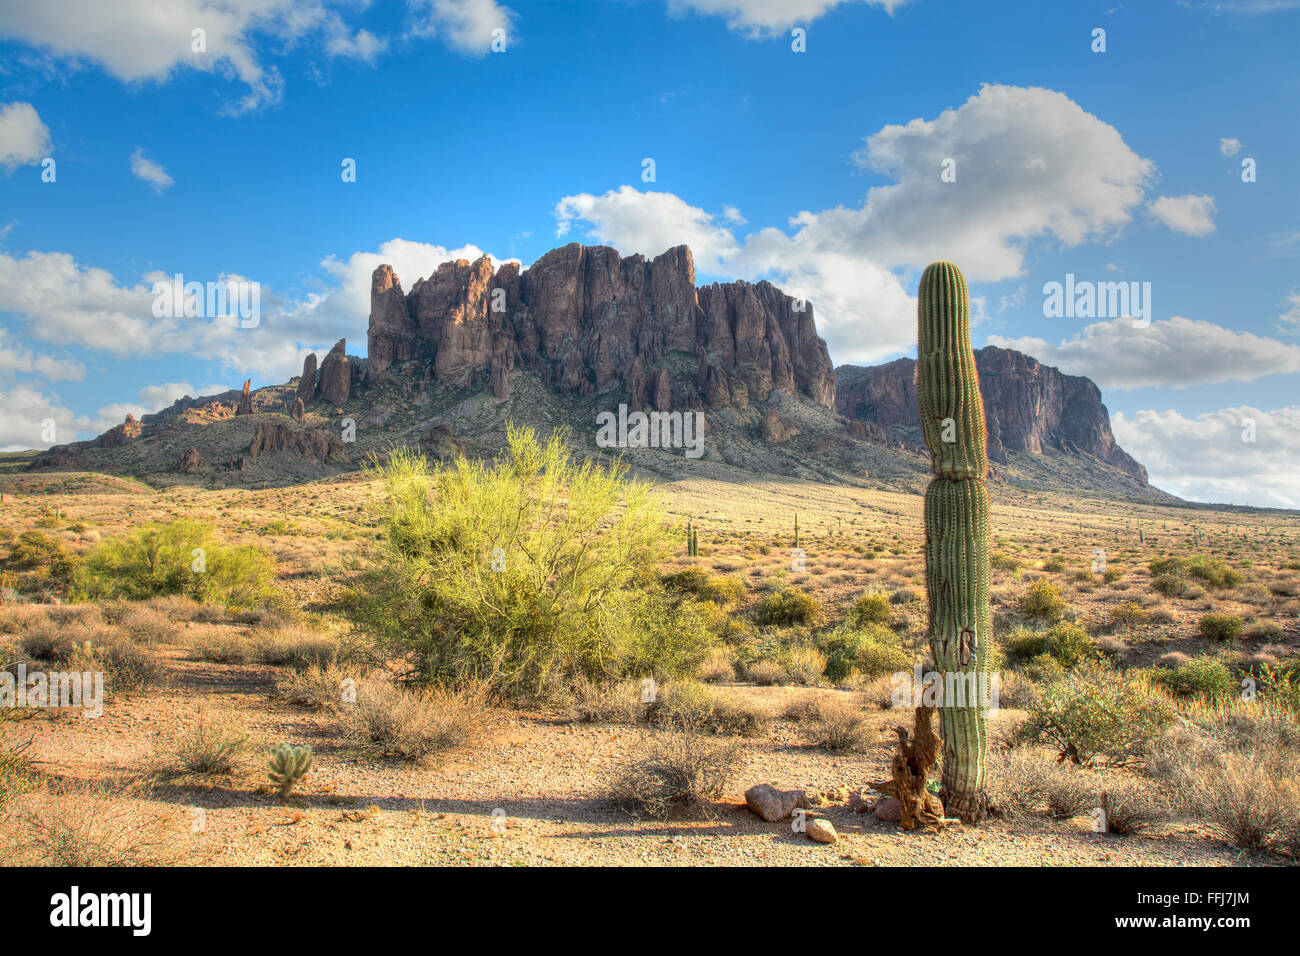 Famous Superstition Mountain in Arizona framed by a lone saguaro cactus shows the beauty of this dry desert landscape. Stock Photo